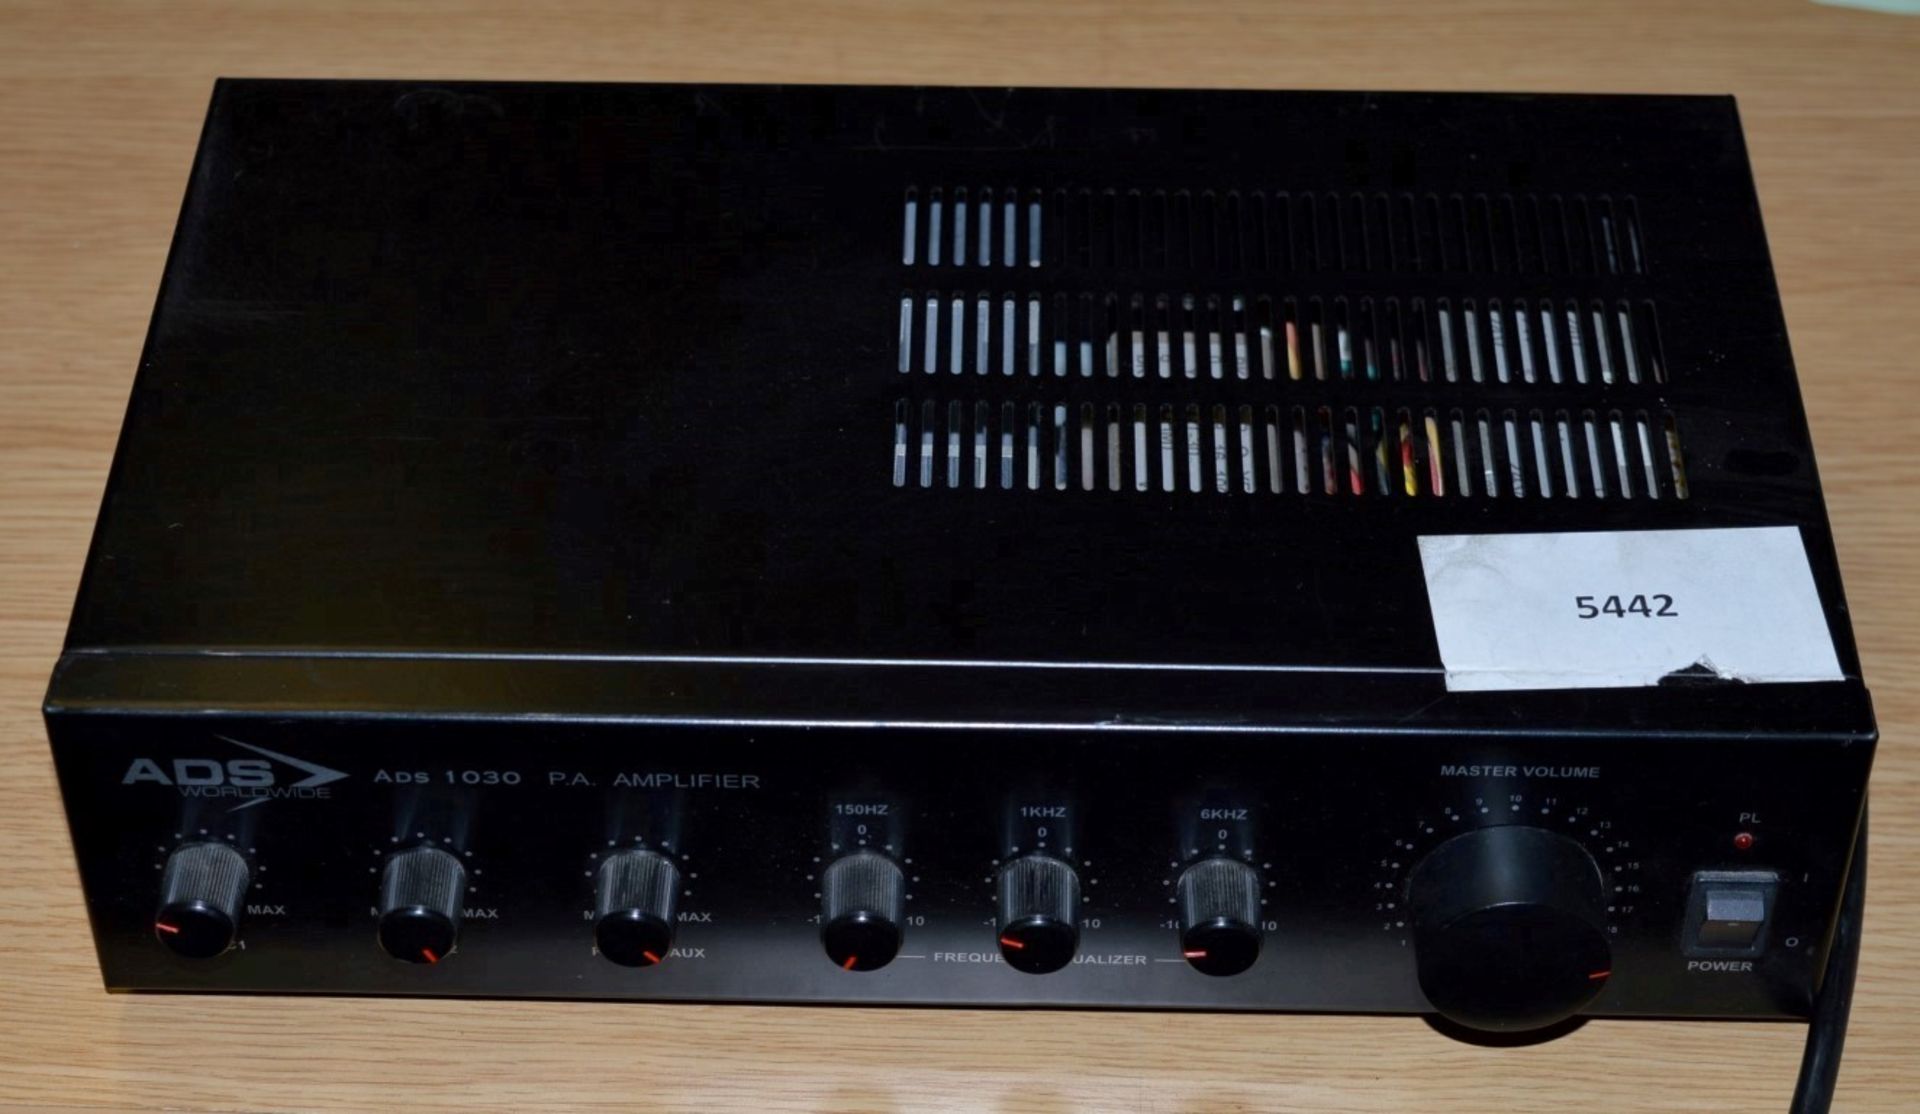 1 x ADS 1030 - 30W 100V PA Amplifier - Working Order - CL011 - Location: Altrincham WA14 - RRP £